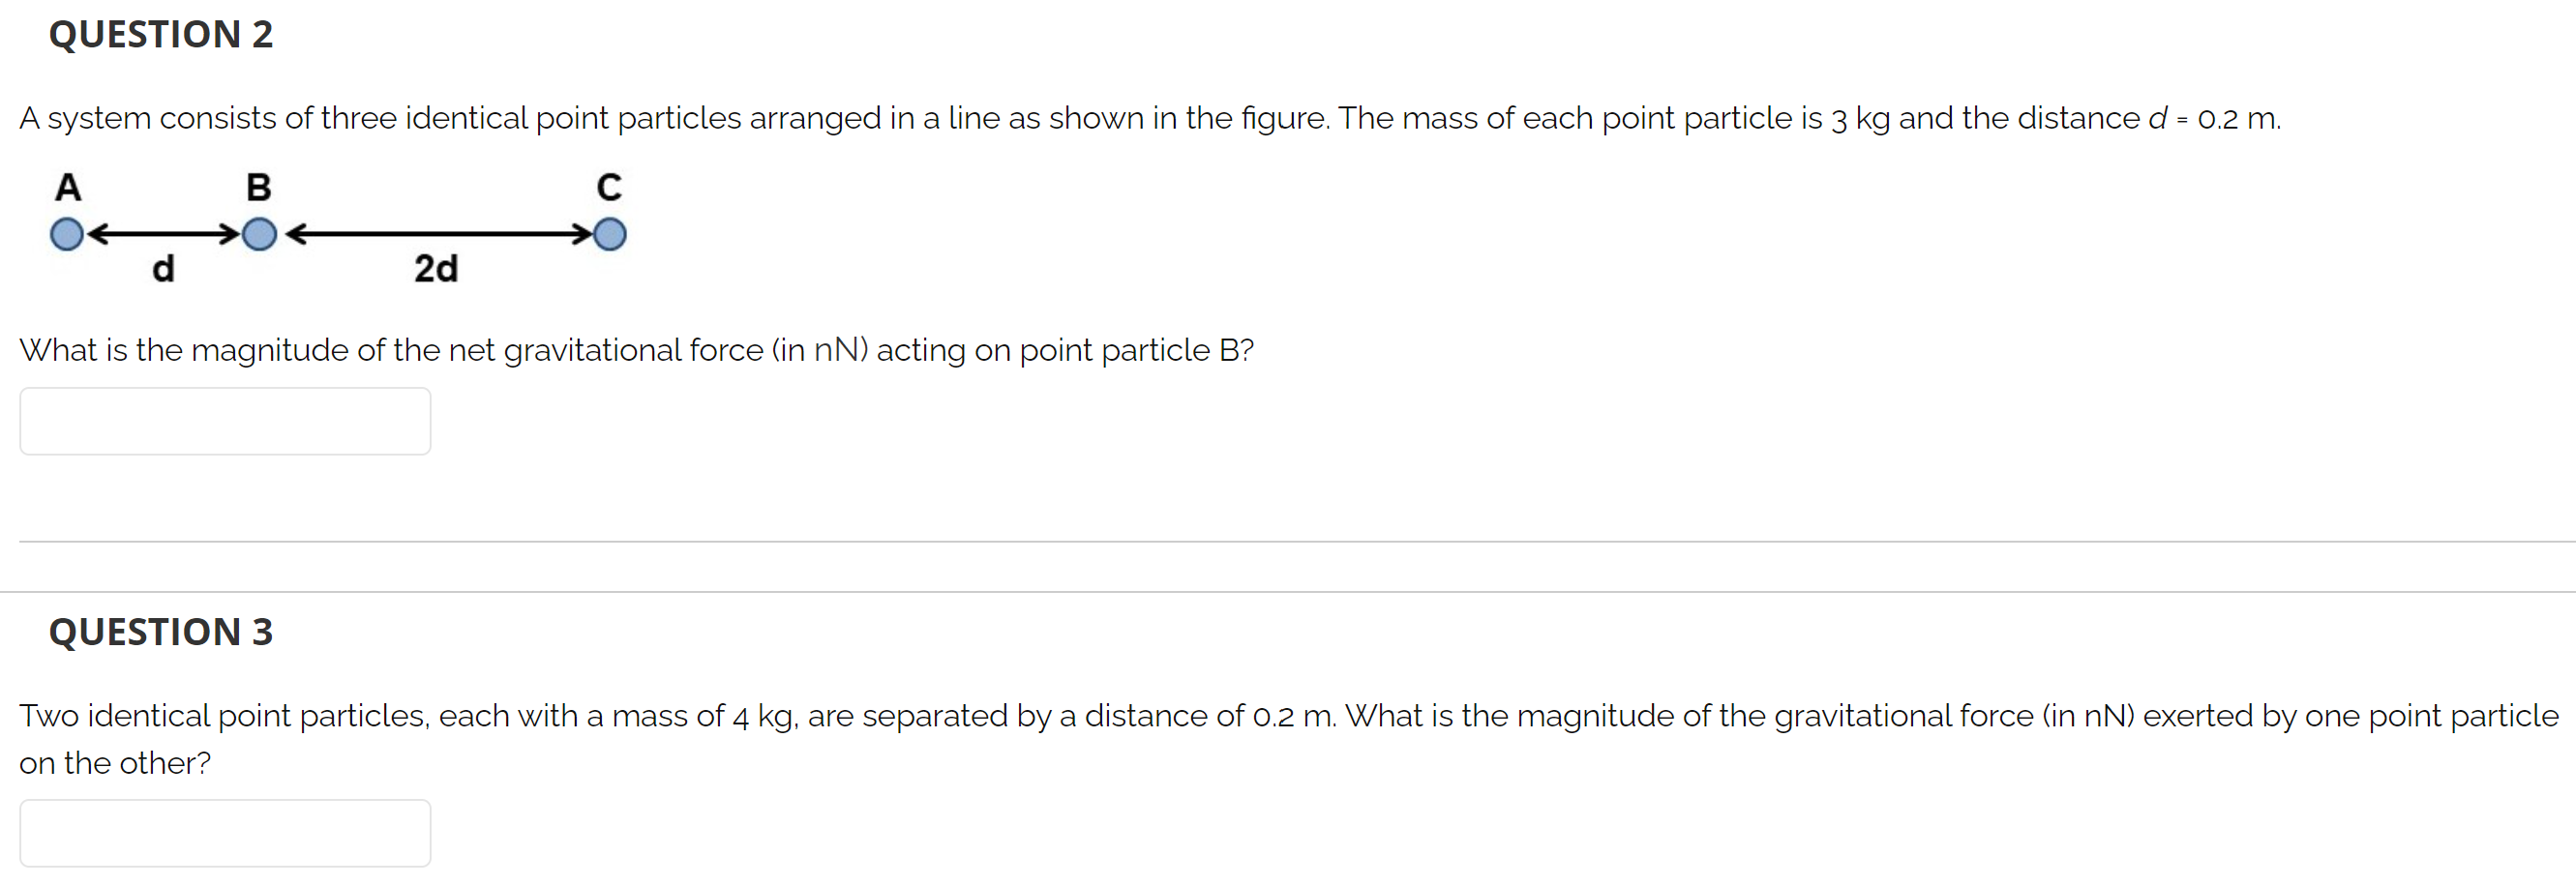 QUESTION 2 A system consists of three identical point particles arranged in a line as shown in the figure. The mass of each point particle is 3 kg and the distance d = 0.2 m. What is the magnitude of the net gravitational force (in nN) acting on point particle B? QUESTION 3 Two identical point particles, each with a mass of 4 kg, are separated by a distance of 0.2 m. What is the magnitude of the gravitational force (in nN) exerted by one point particle on the other?